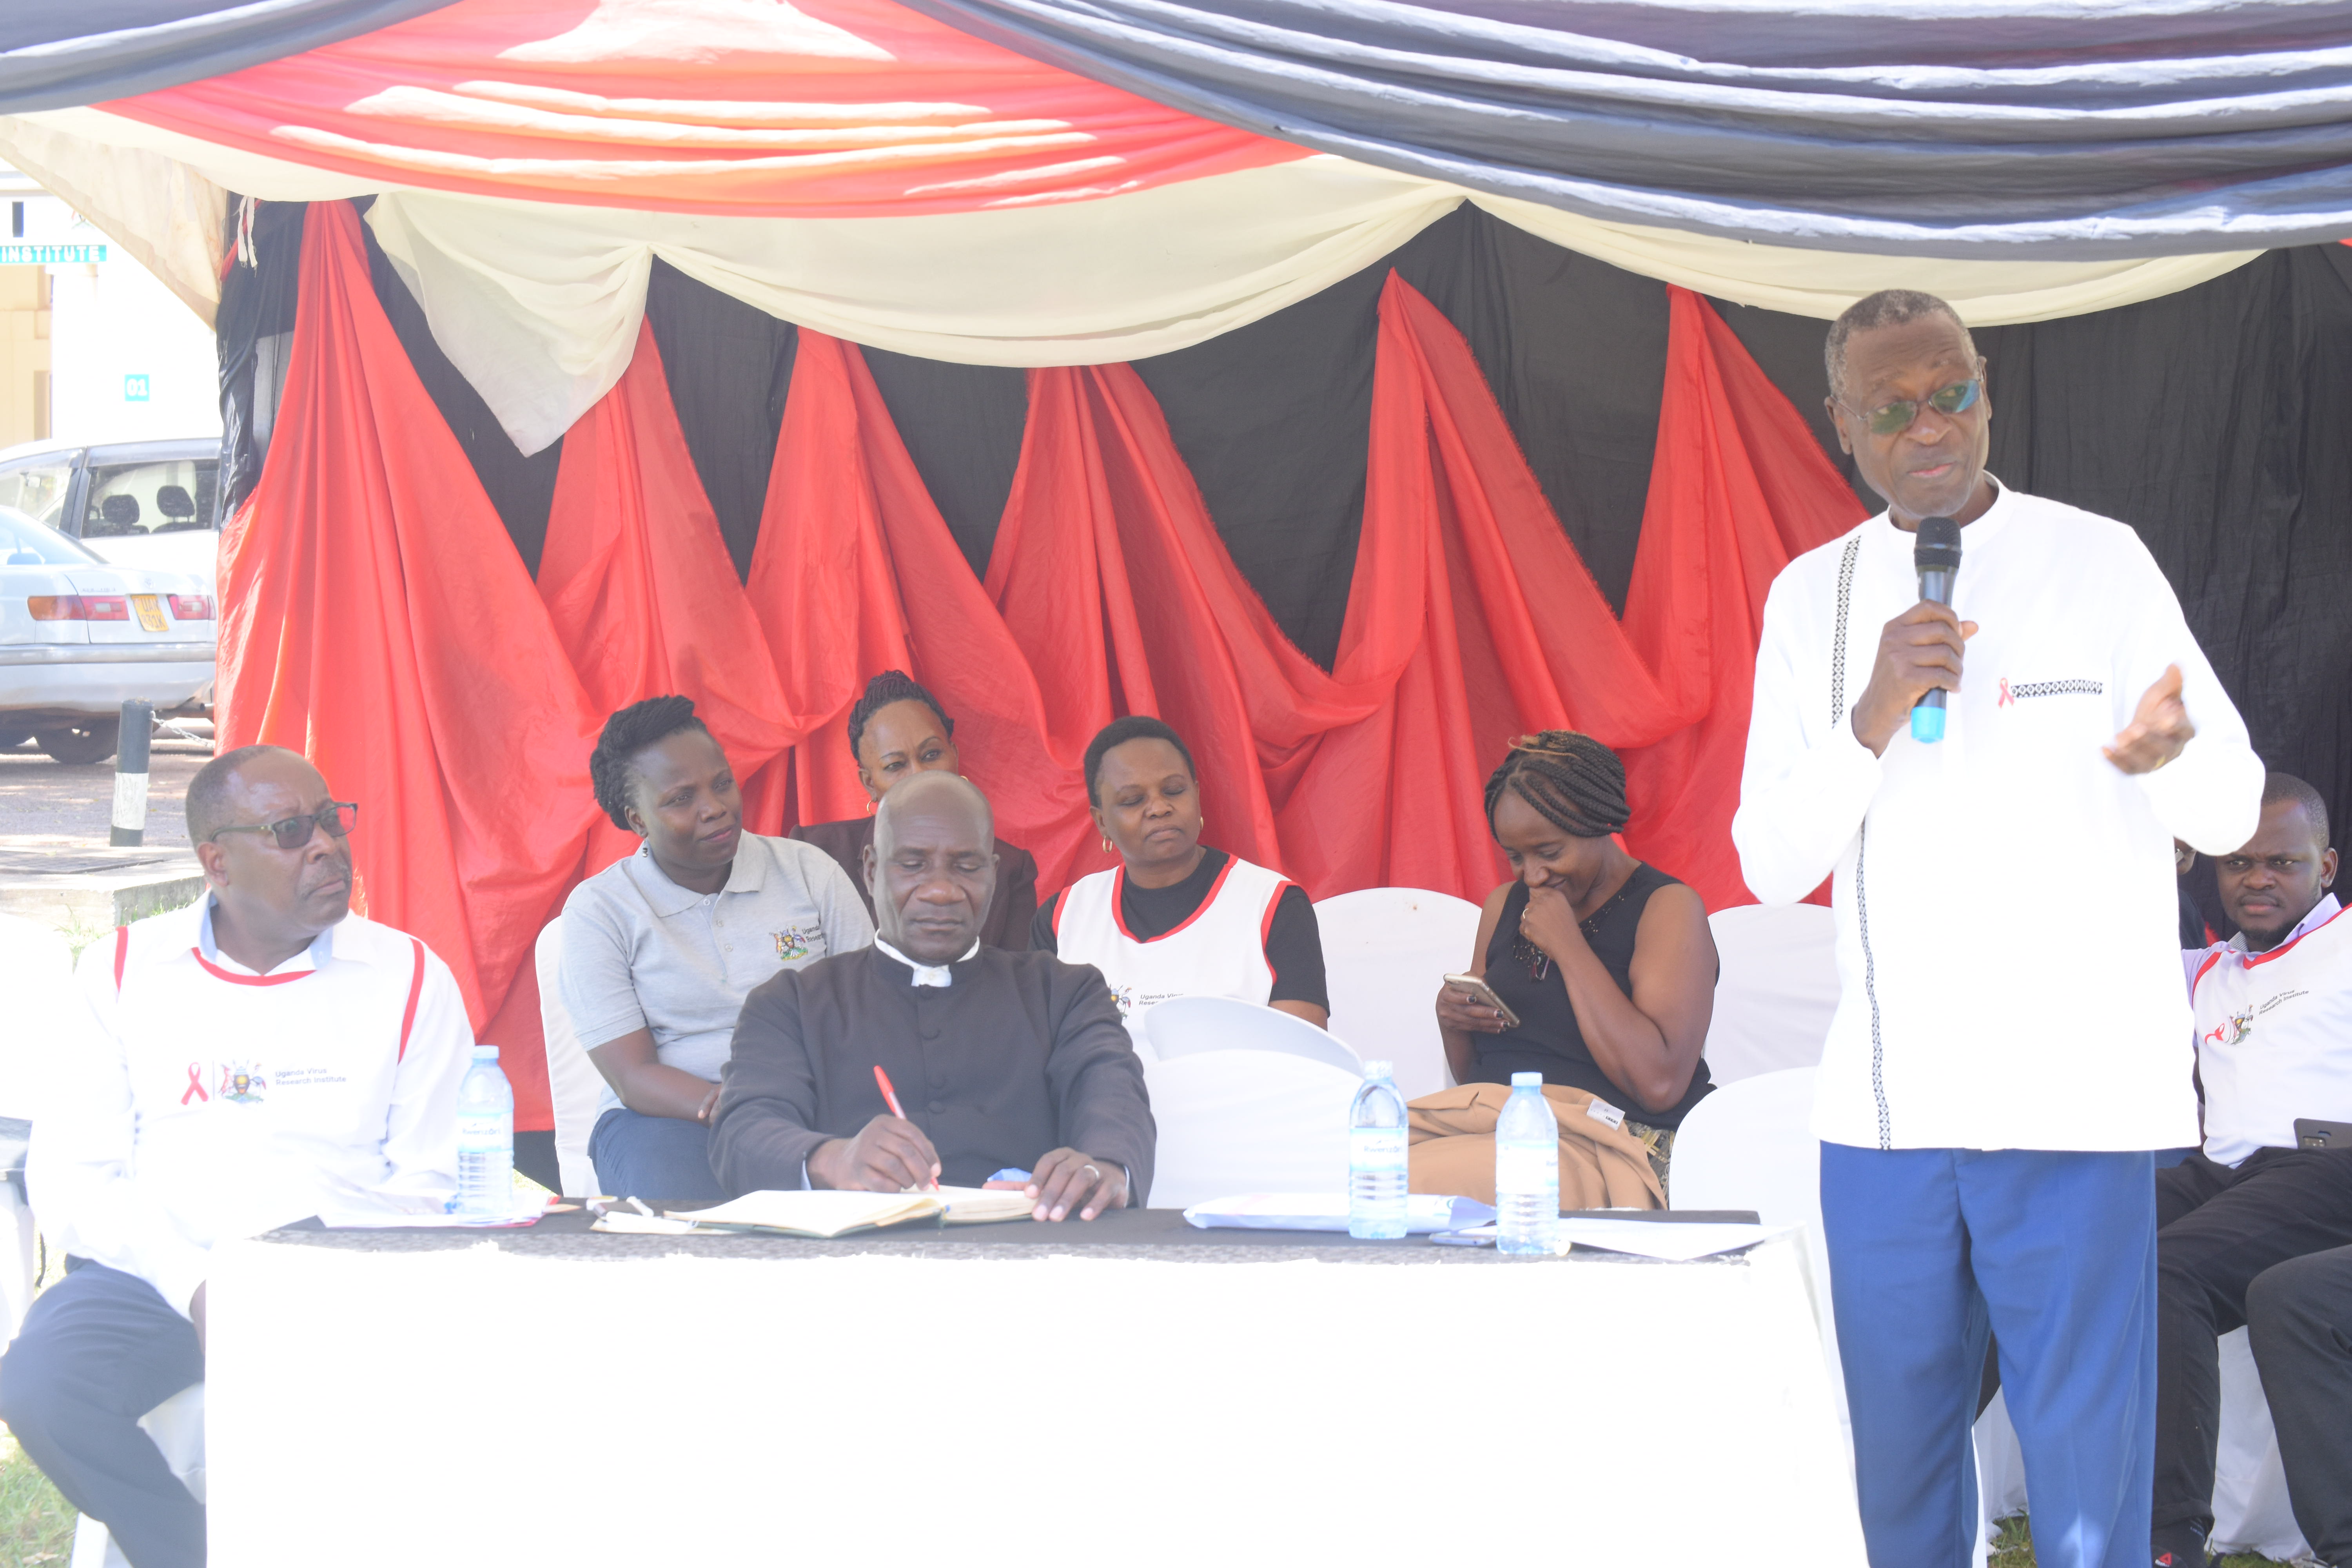 Dr Stephen Watiti was guest of honour at the event